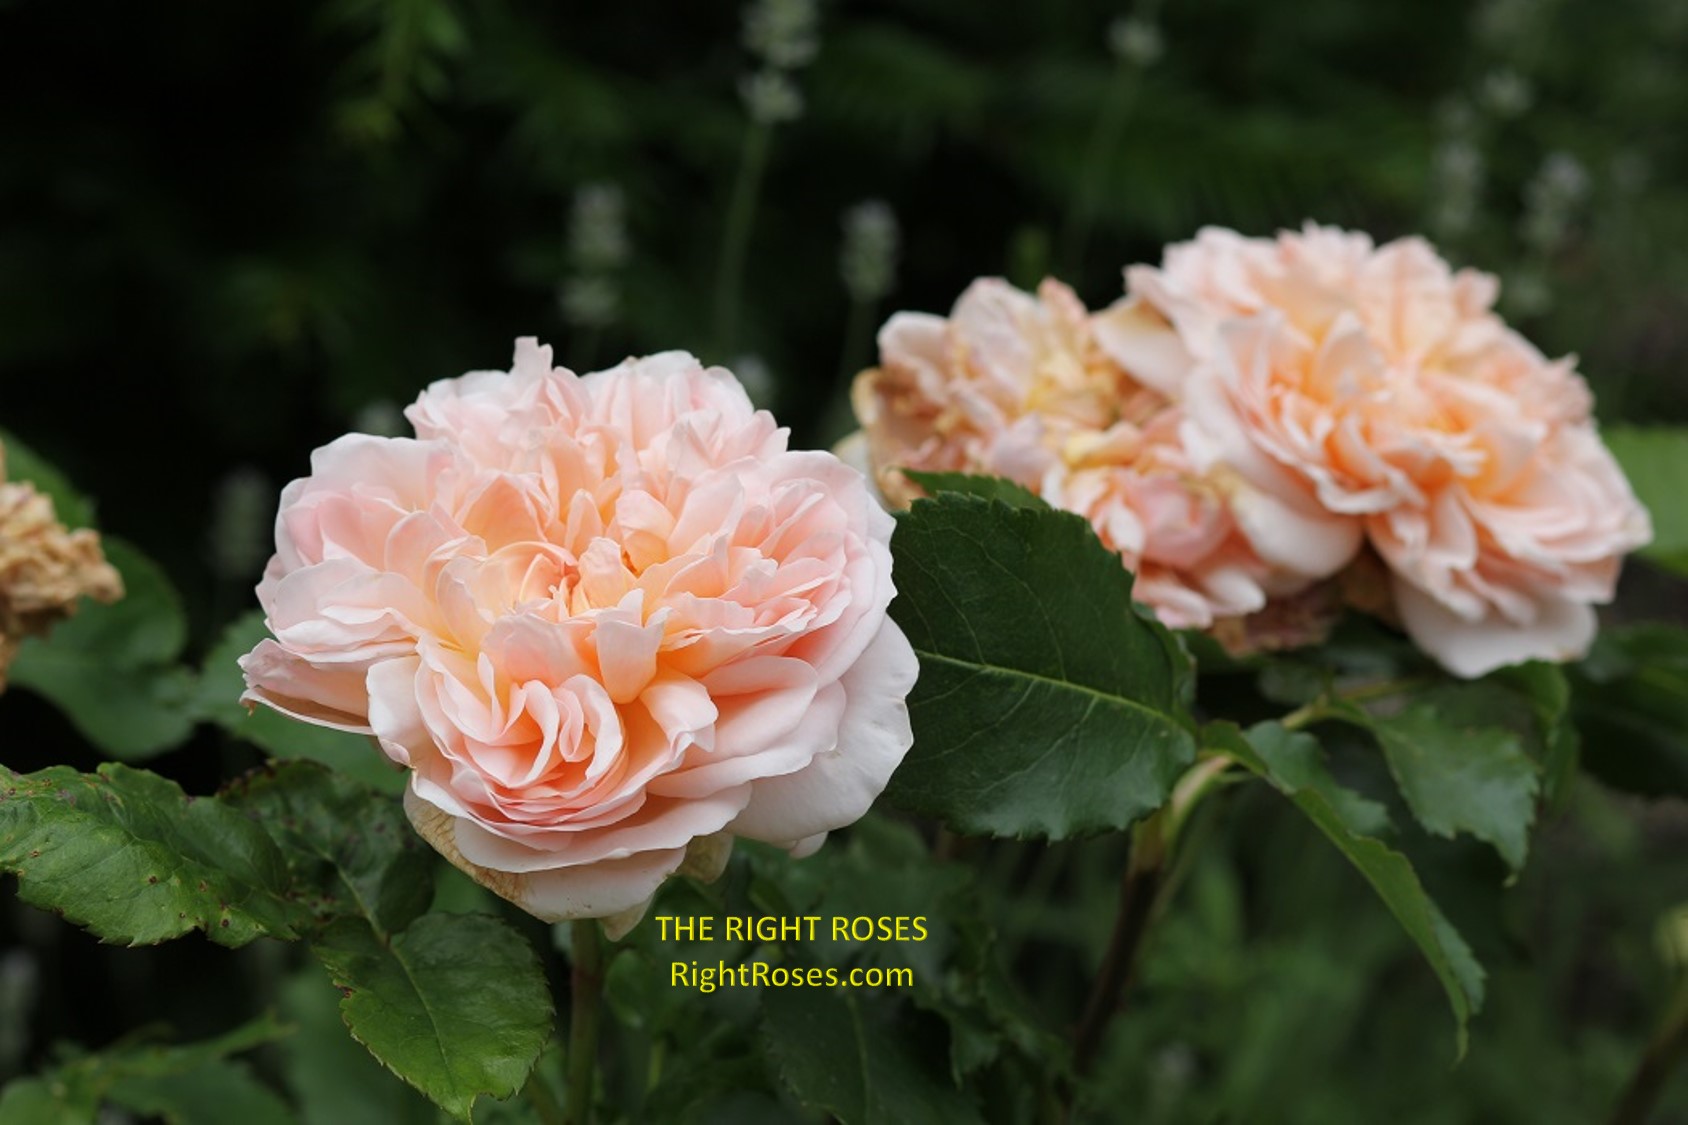 Evelyn rose review the right roses score best top garden store david austin english roses rose products rose rating the right leap rose food fertilizer